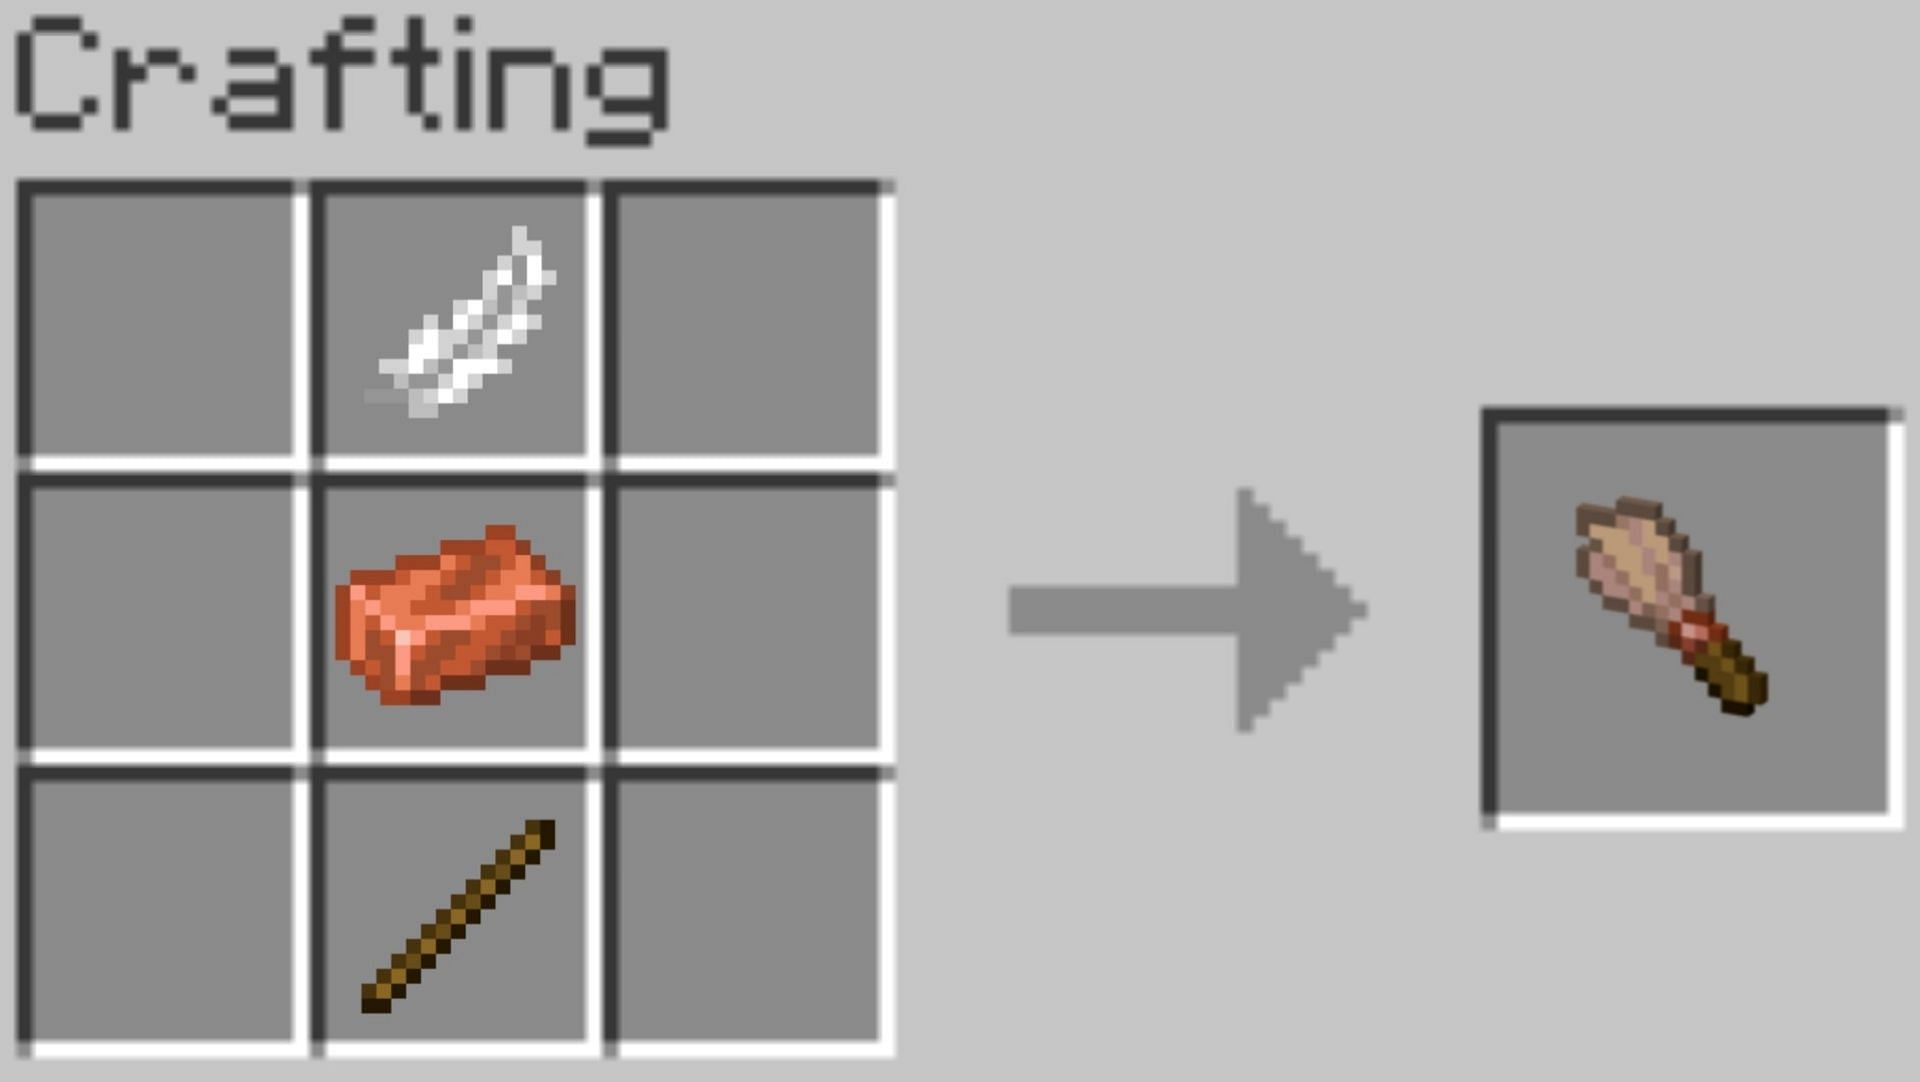 The new brush tool will require feathers, copper ingots, and sticks to craft in Minecraft 1.20 Trails and Tales update (Image via Mojang)